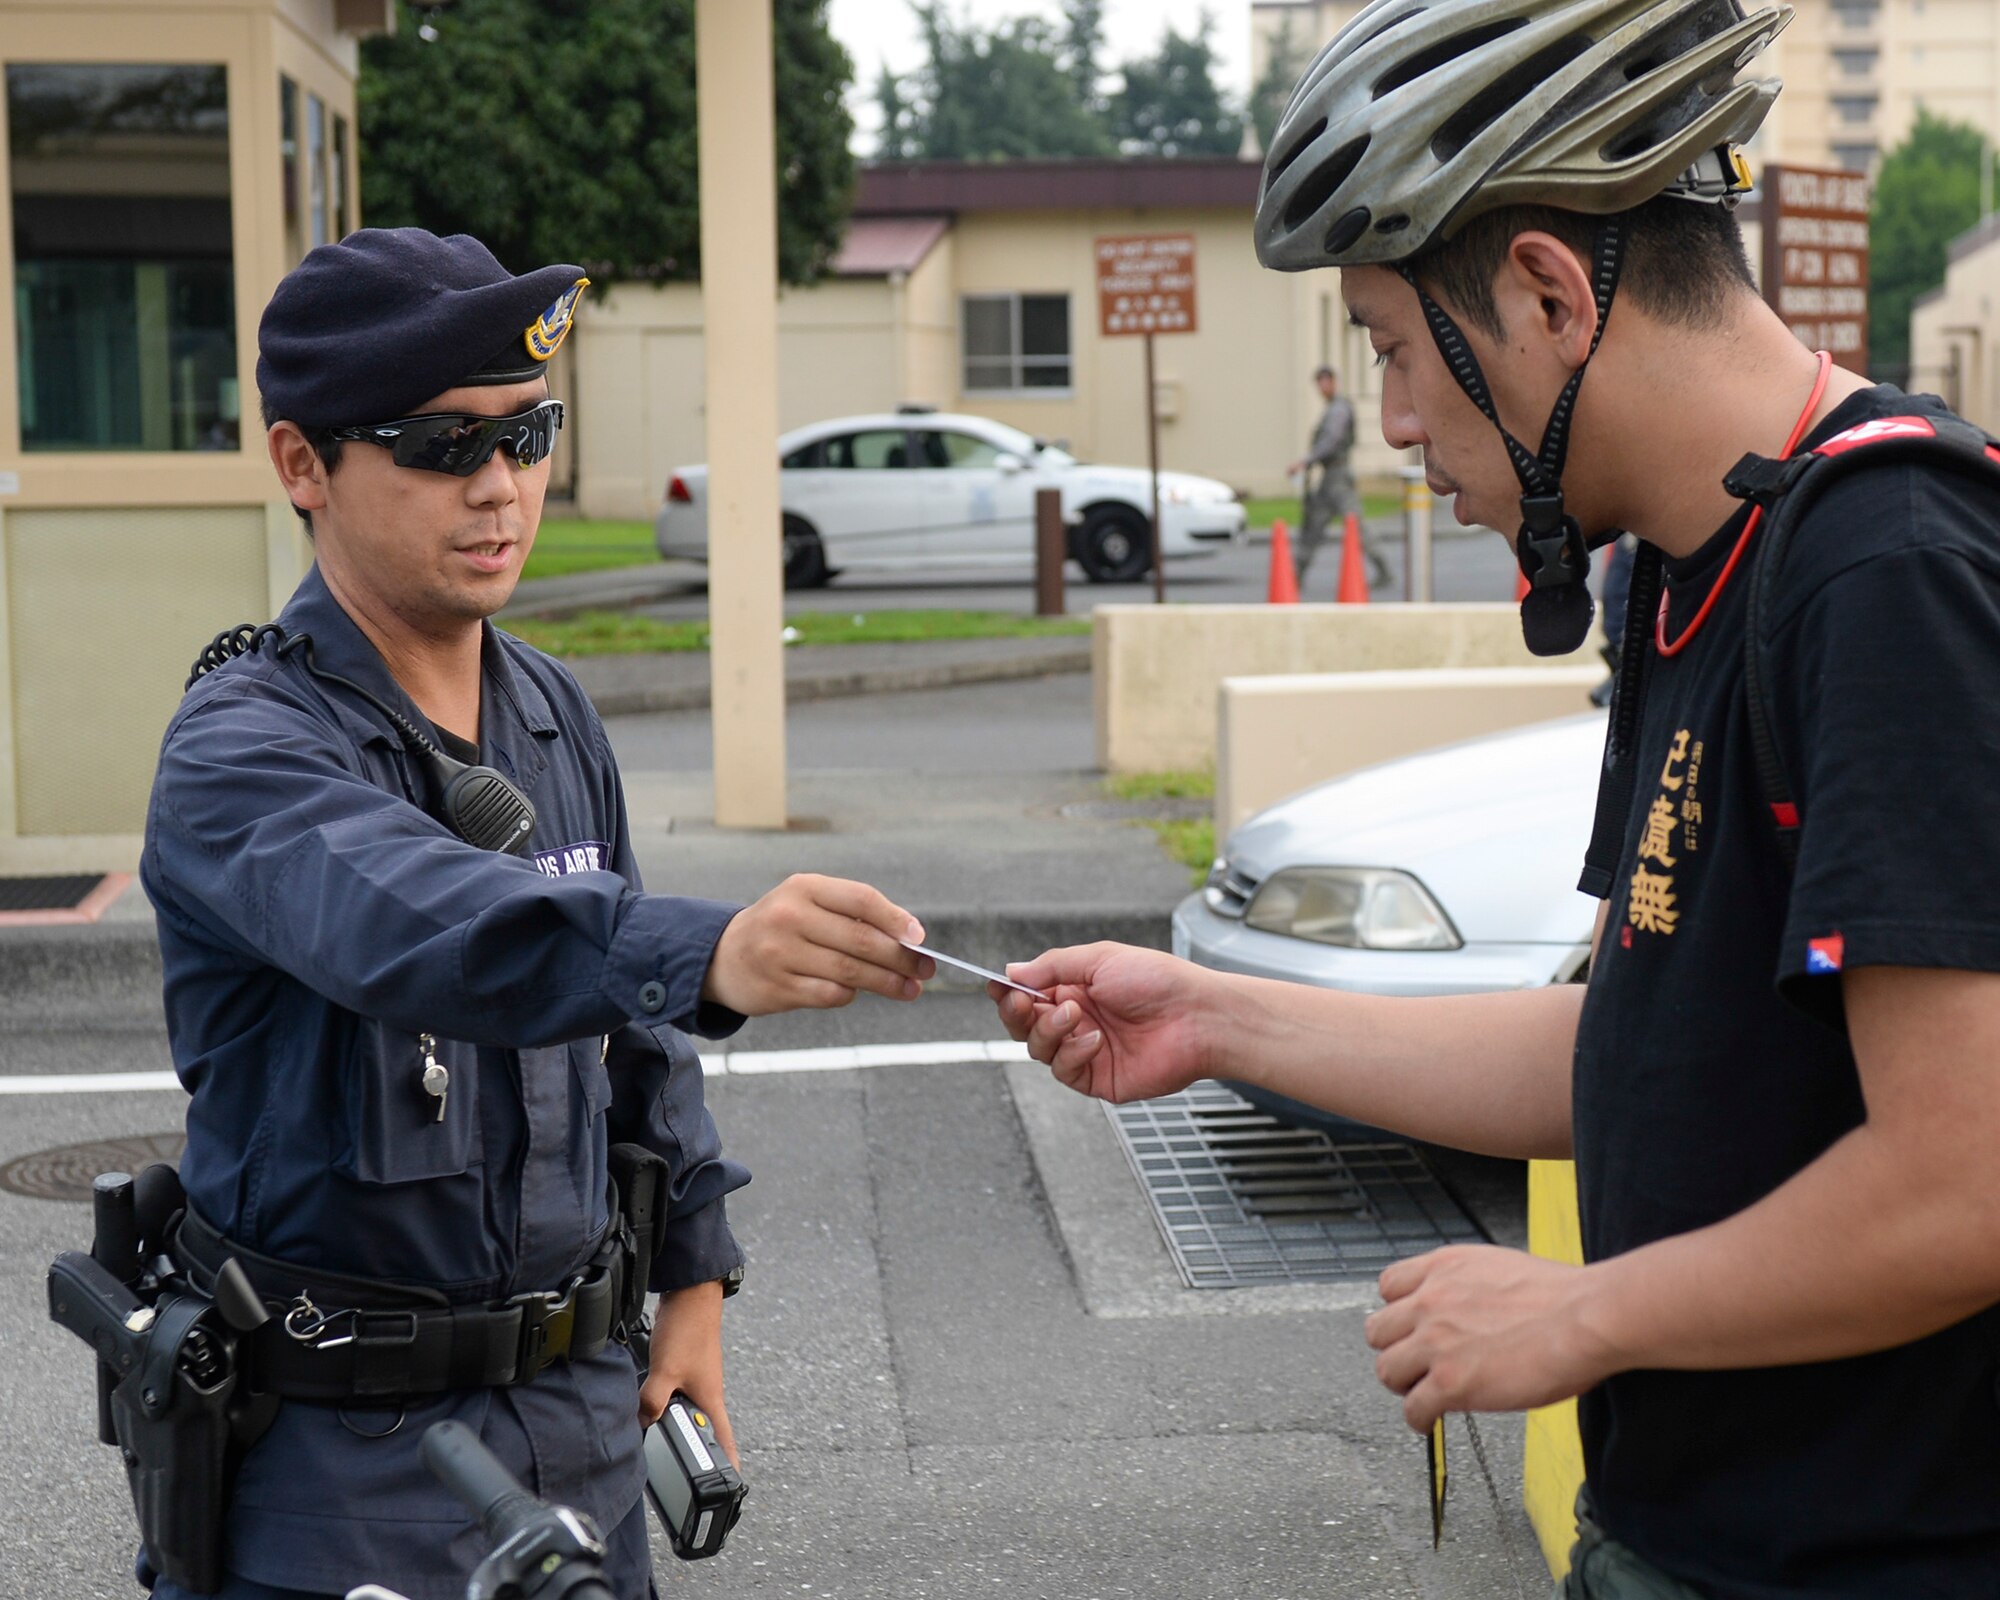 Masafumi Shinozuka, civilian guard, clears a visitor’s controlled access card at Yokota Air Base, Japan, July 29, 2015. Many civilian guards have been securing Yokota’s gates for more than 20 years, allowing Airlifters to continue the mission without unauthorized visitors entering base. (U.S. Air Force photo by Airman 1st Class Elizabeth Baker/Released)